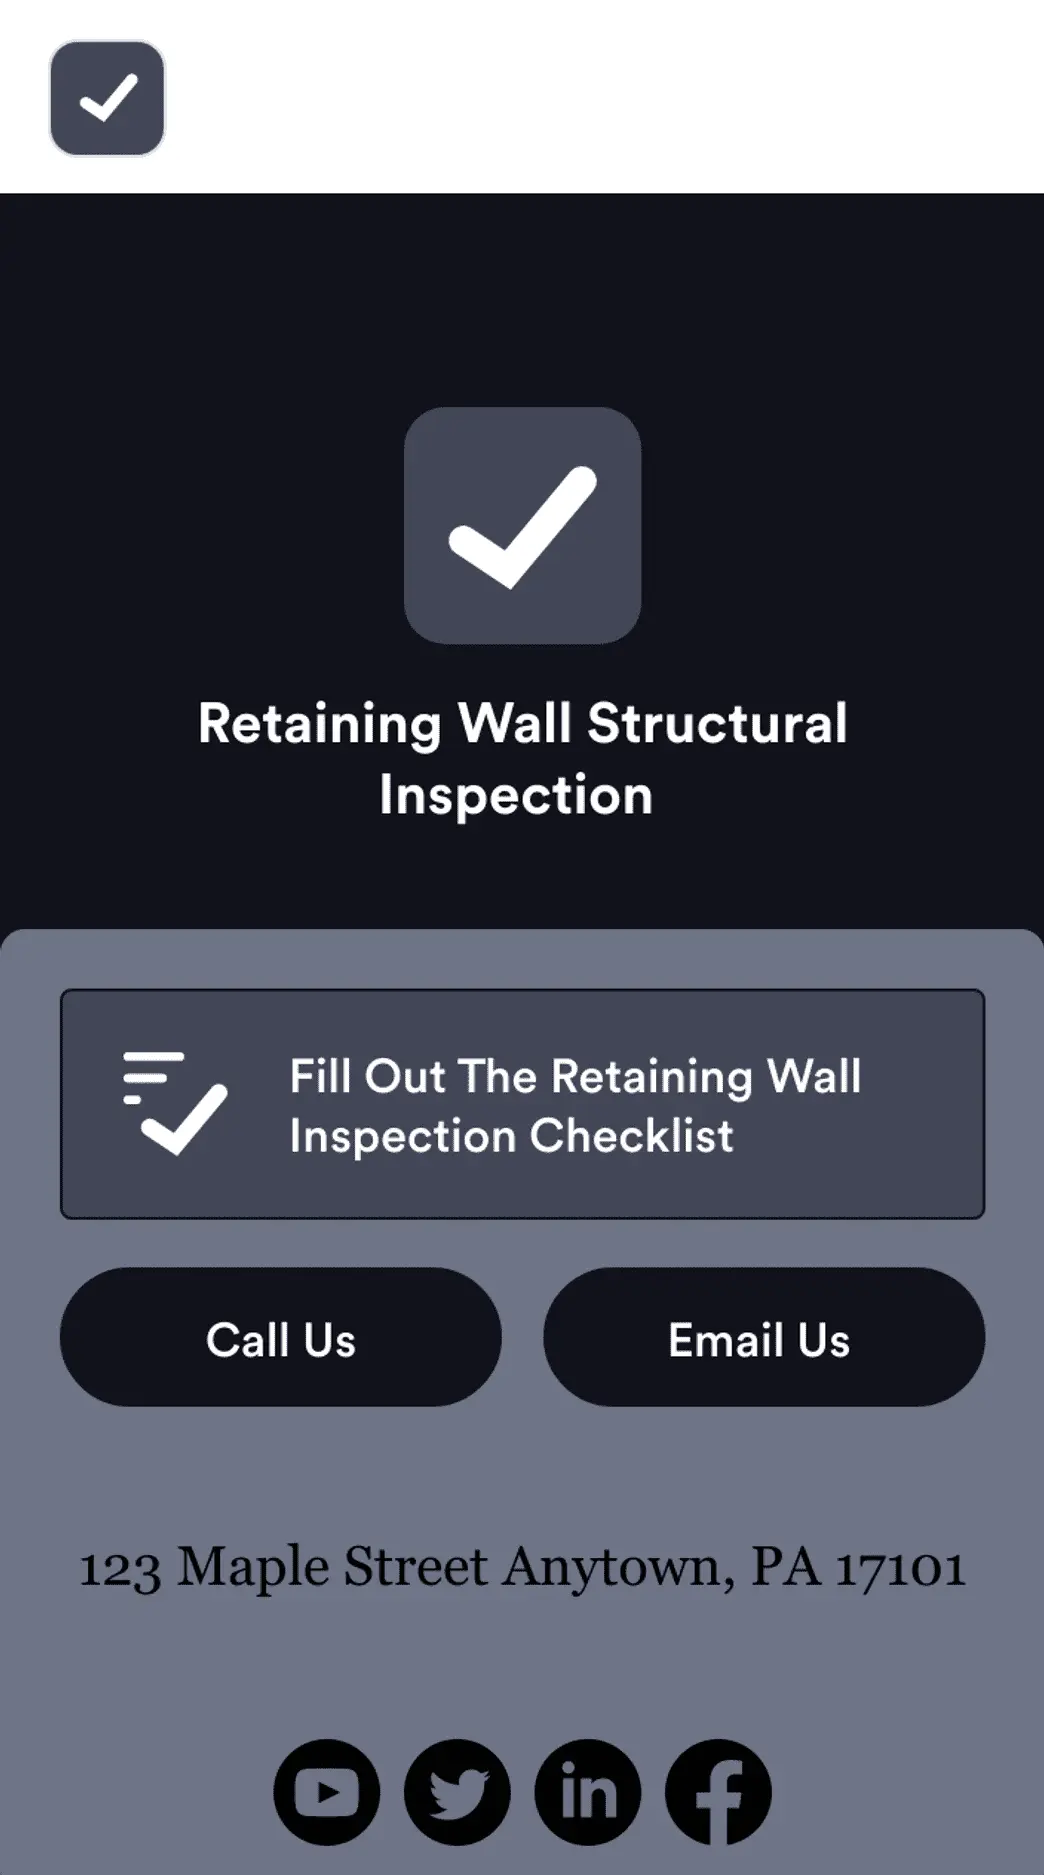 Retaining Wall Structural Inspection